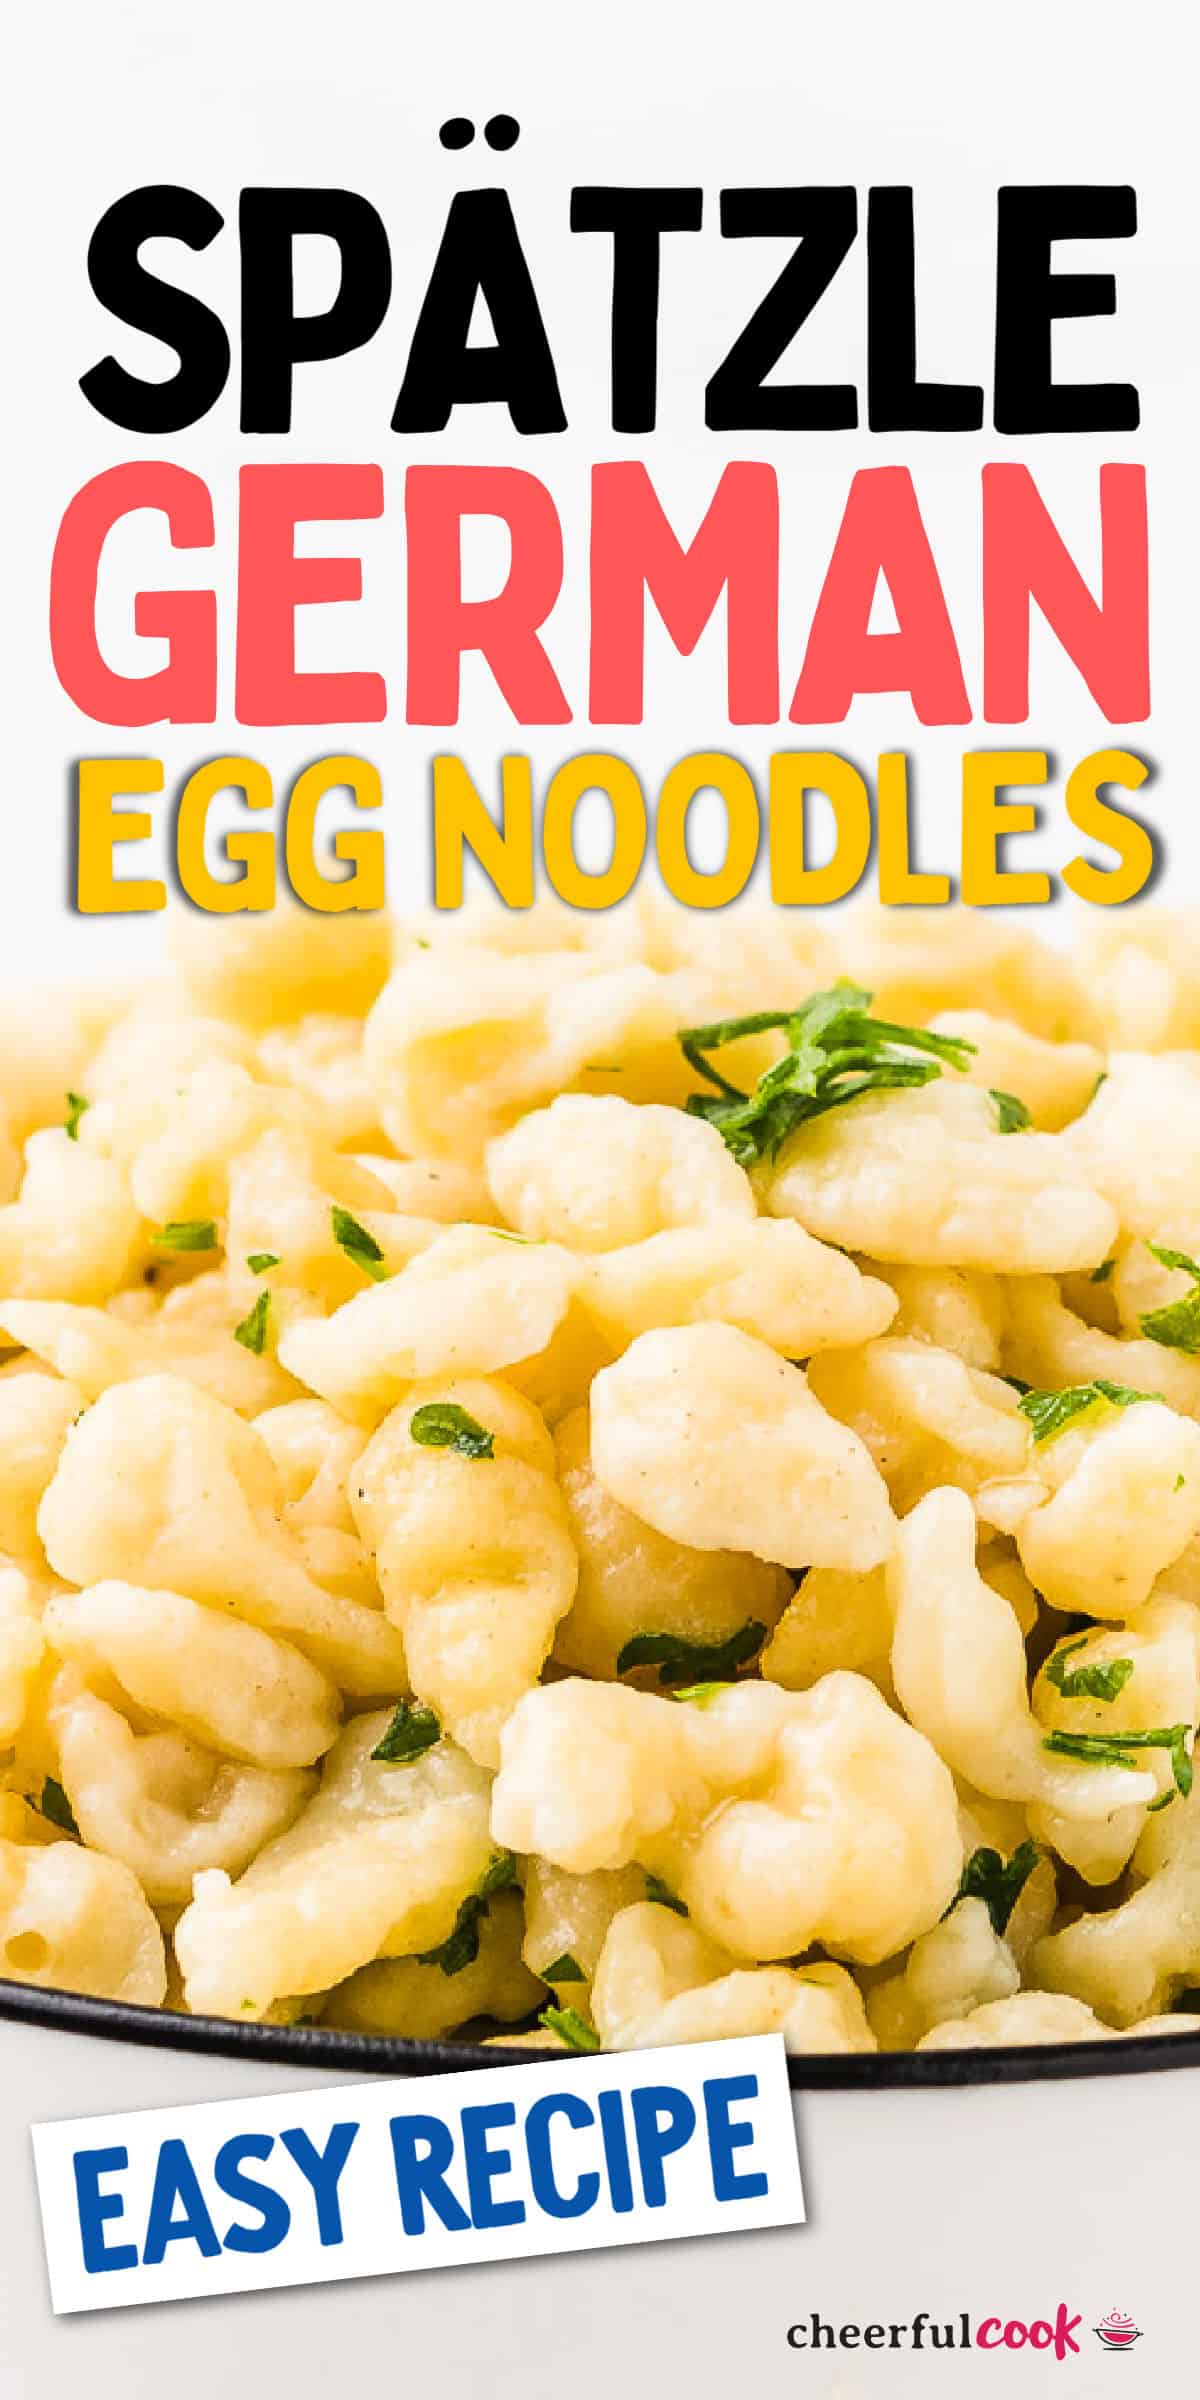 This easy homemade Spaetzle recipe is the only one you'll ever need. With less than a handful of ingredients, you will be able to recreate one of Germany's most famous and most beloved side dishes. #cheerfulcook #spaetzle #spätzle #germanfood #sidedish #recipe via @cheerfulcook